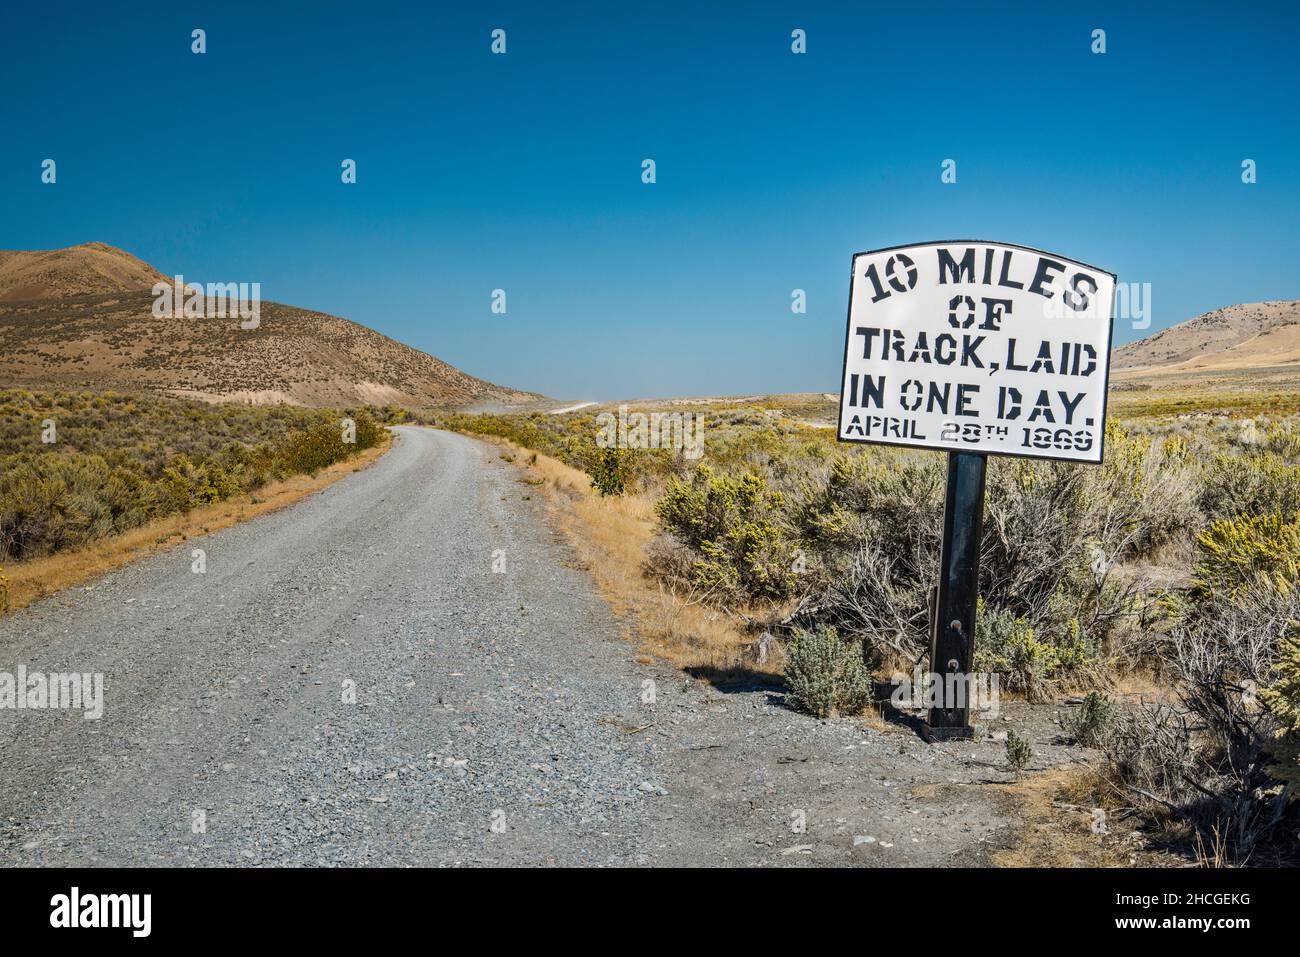 10 Miles of Track sign at Transcontinental Railroad Byway, Central Pacific Railroad grade, Golden Spike National Historical Park, Utah, USA Stock Photo